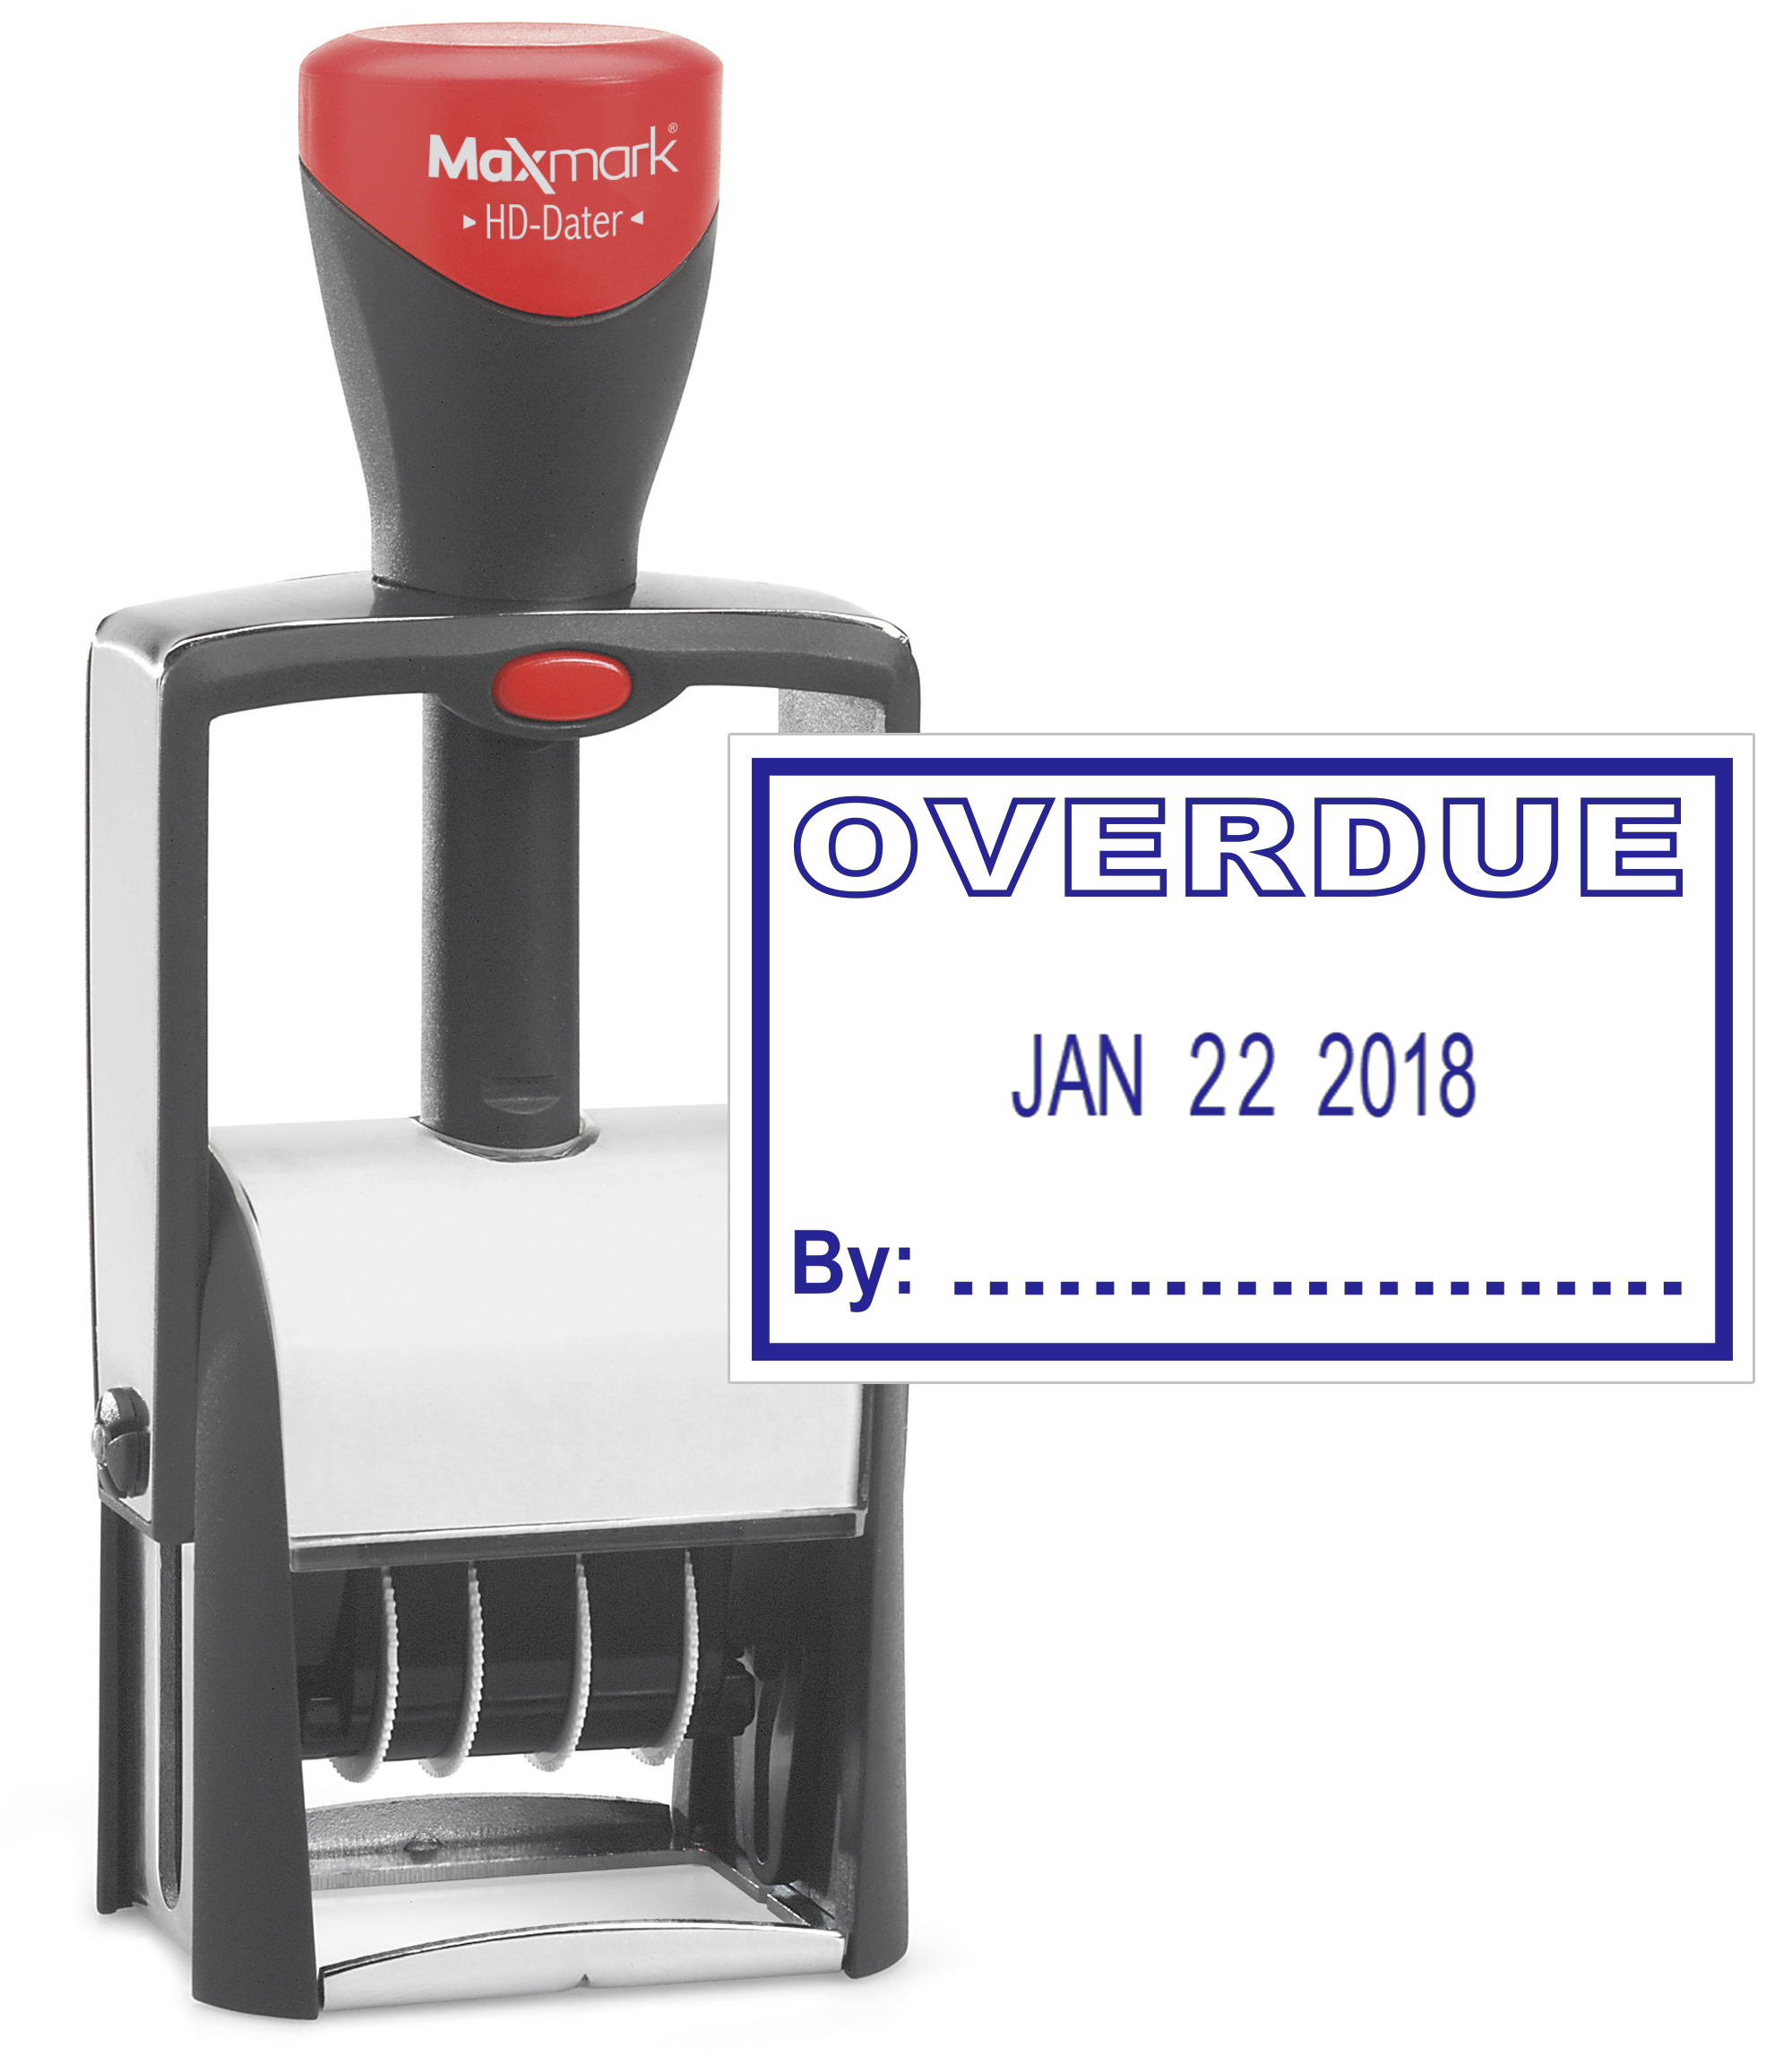 Heavy Duty Date Stamp with "OVERDUE" Self Inking Stamp - BLUE Ink